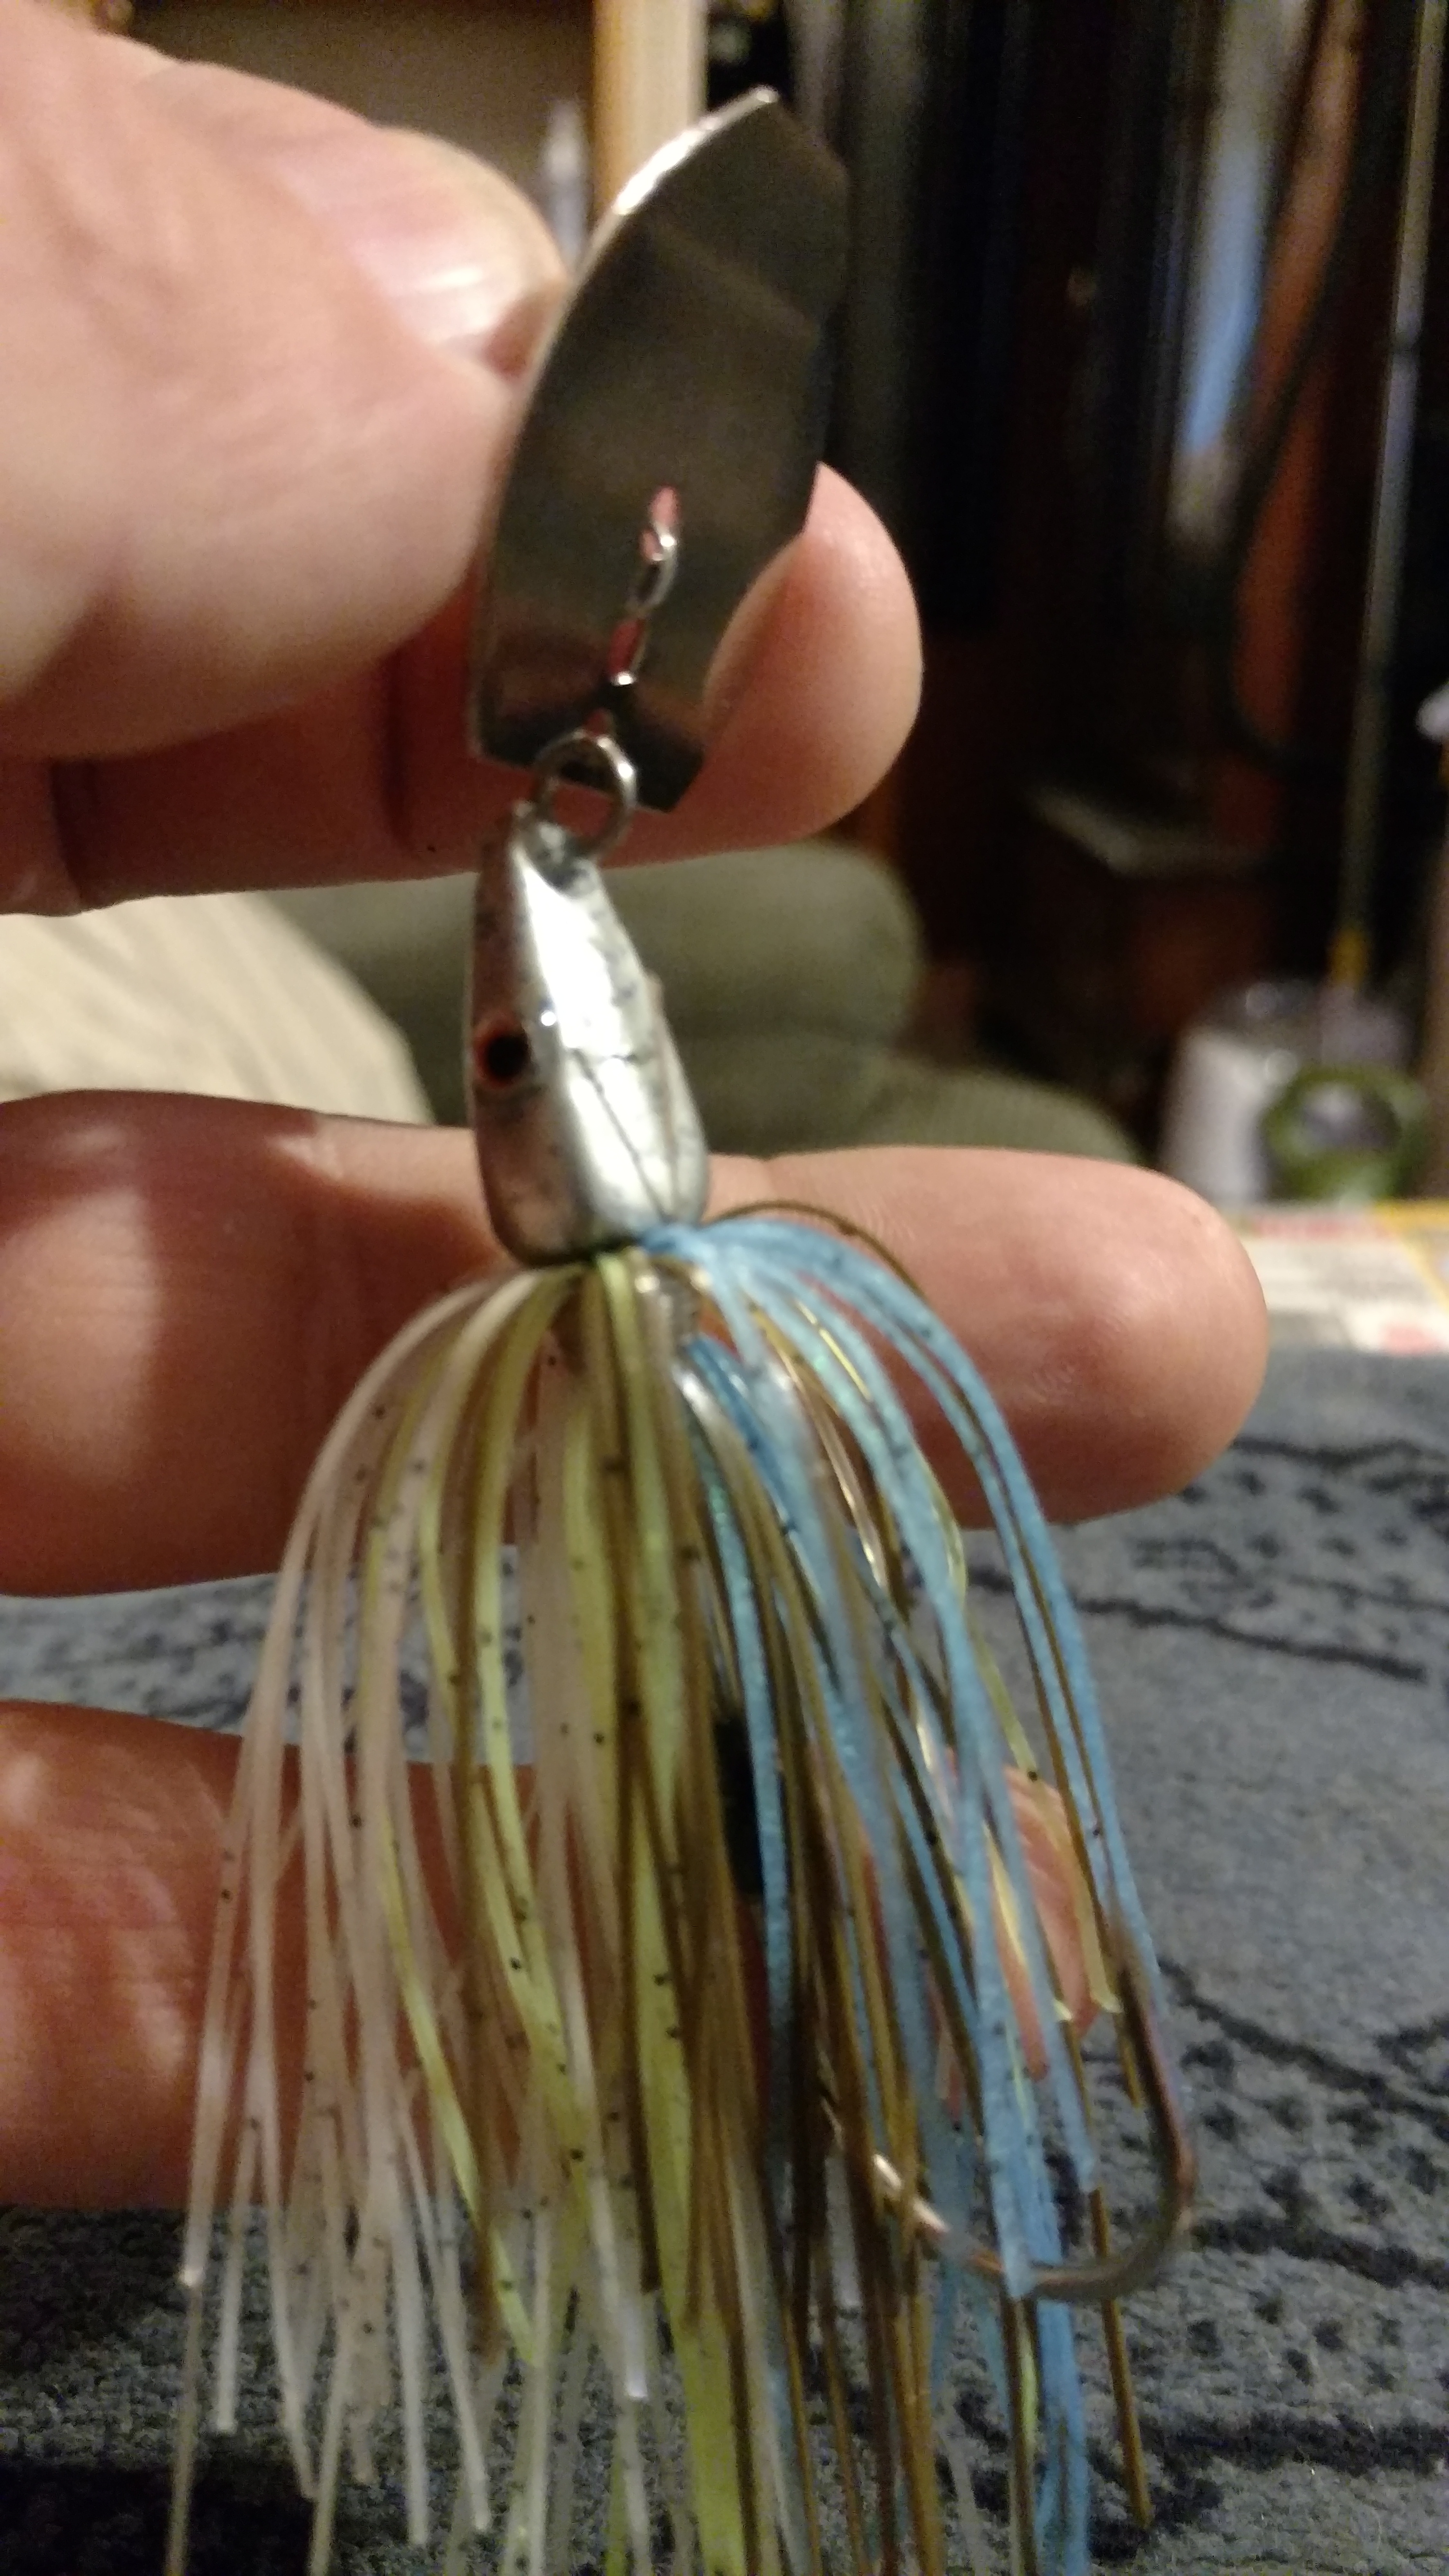 Chatter bait jig selection - Wire Baits -  - Tackle  Building Forums